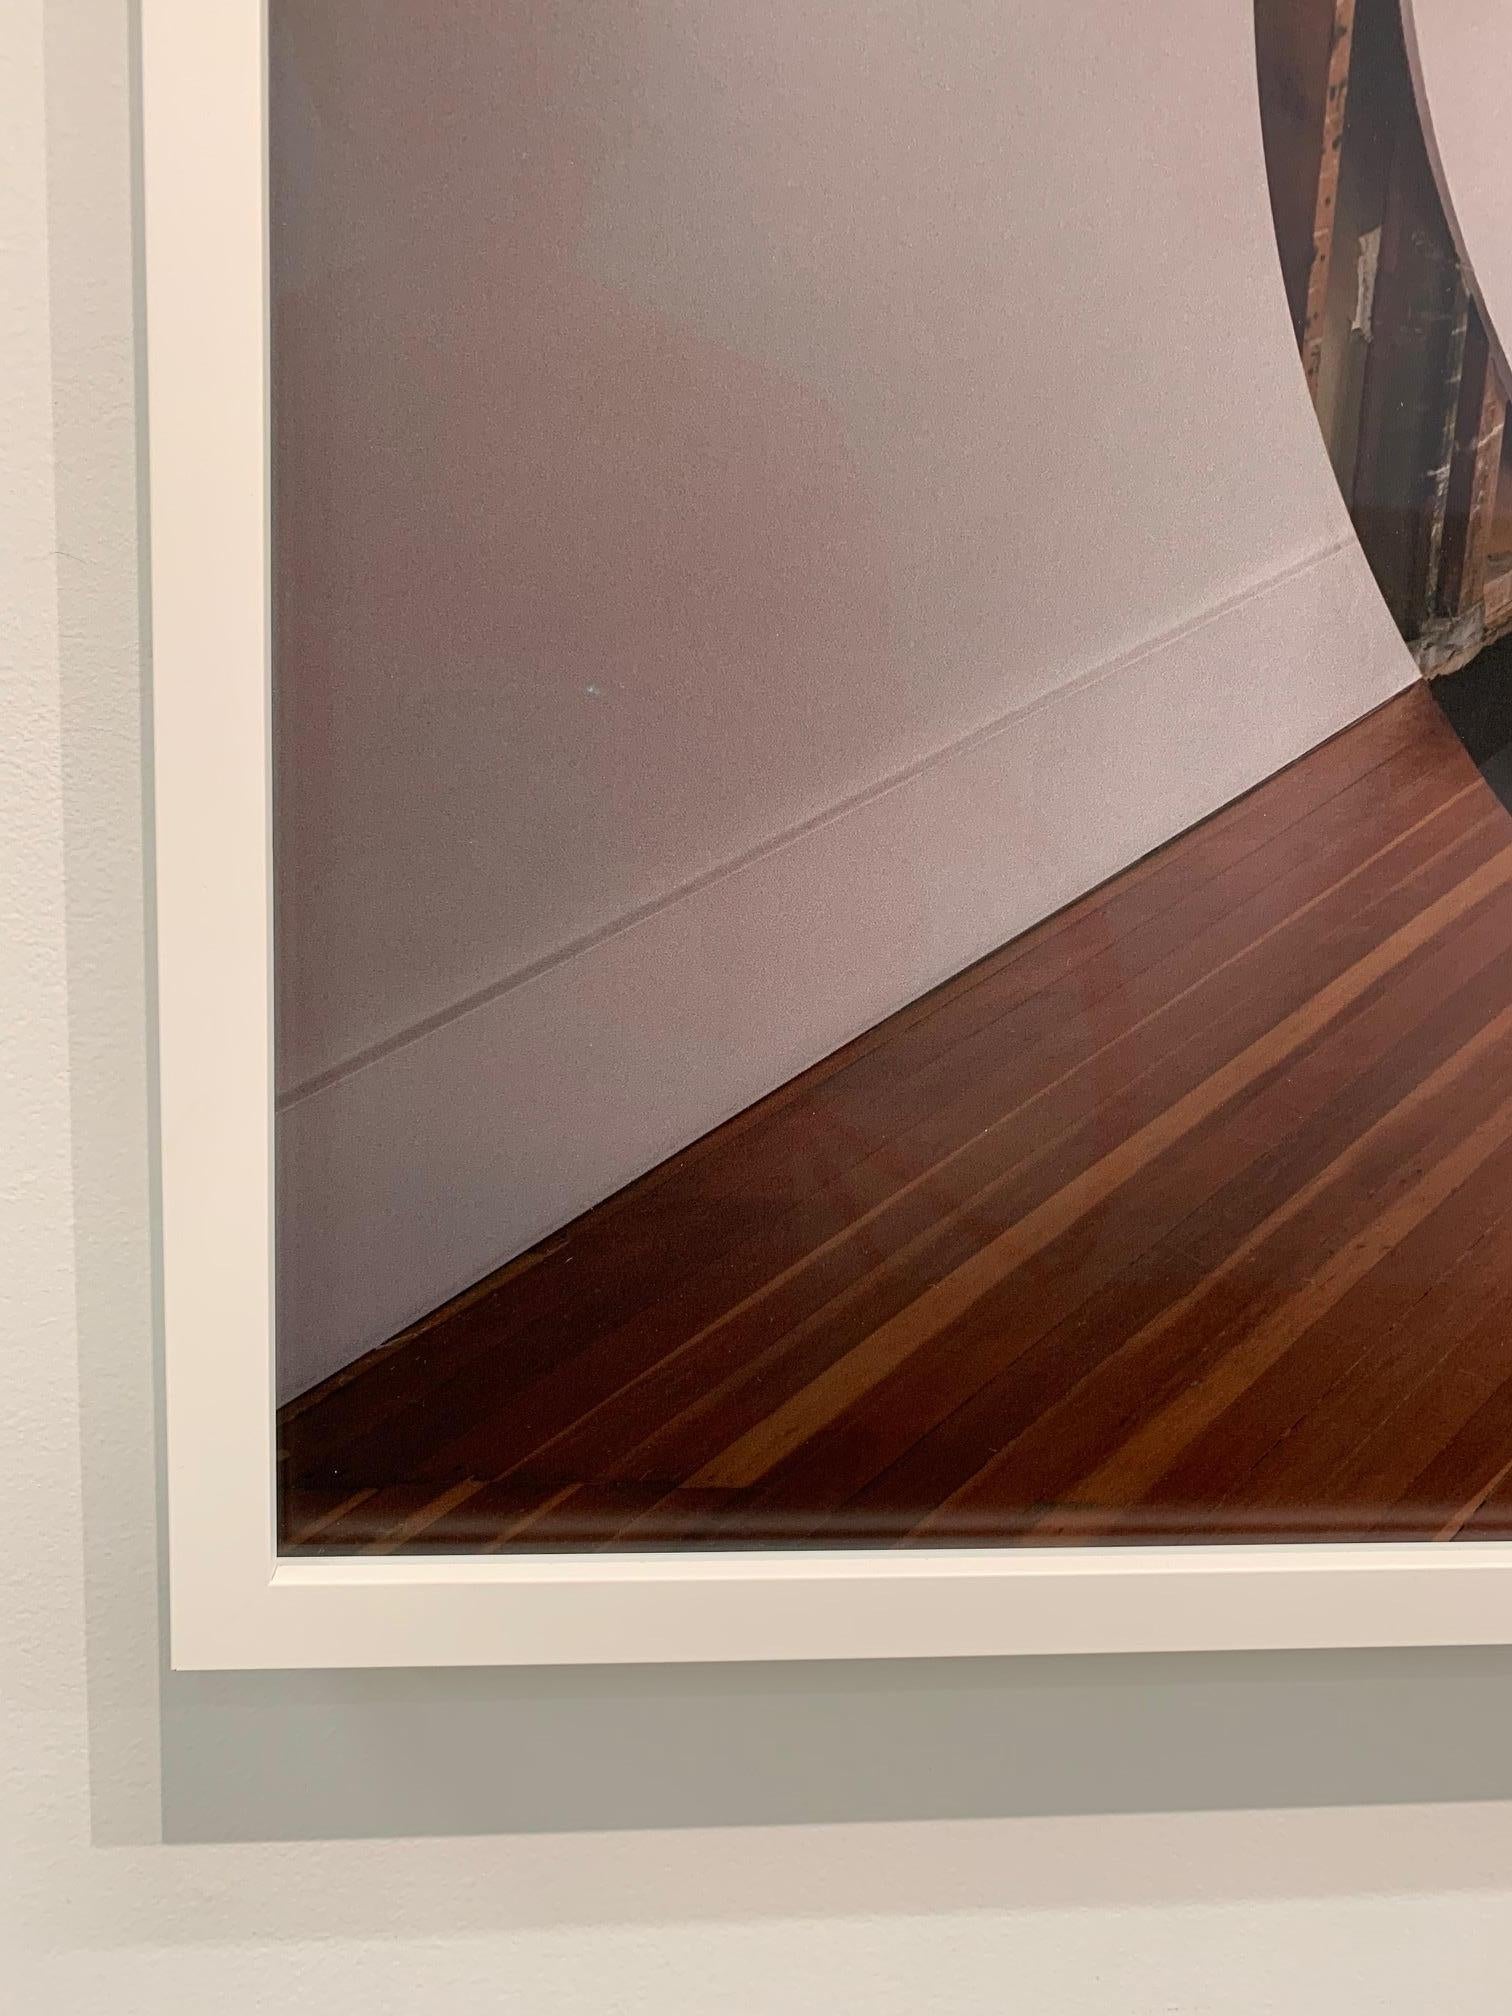 This contemporary, abstract, architectural, optical, photograph depicts an illusion of a floating ellipse, however the ellipse shape physically exists. The artists carefully cut the shape out of the floors, walls and ceiling, and at the exact point